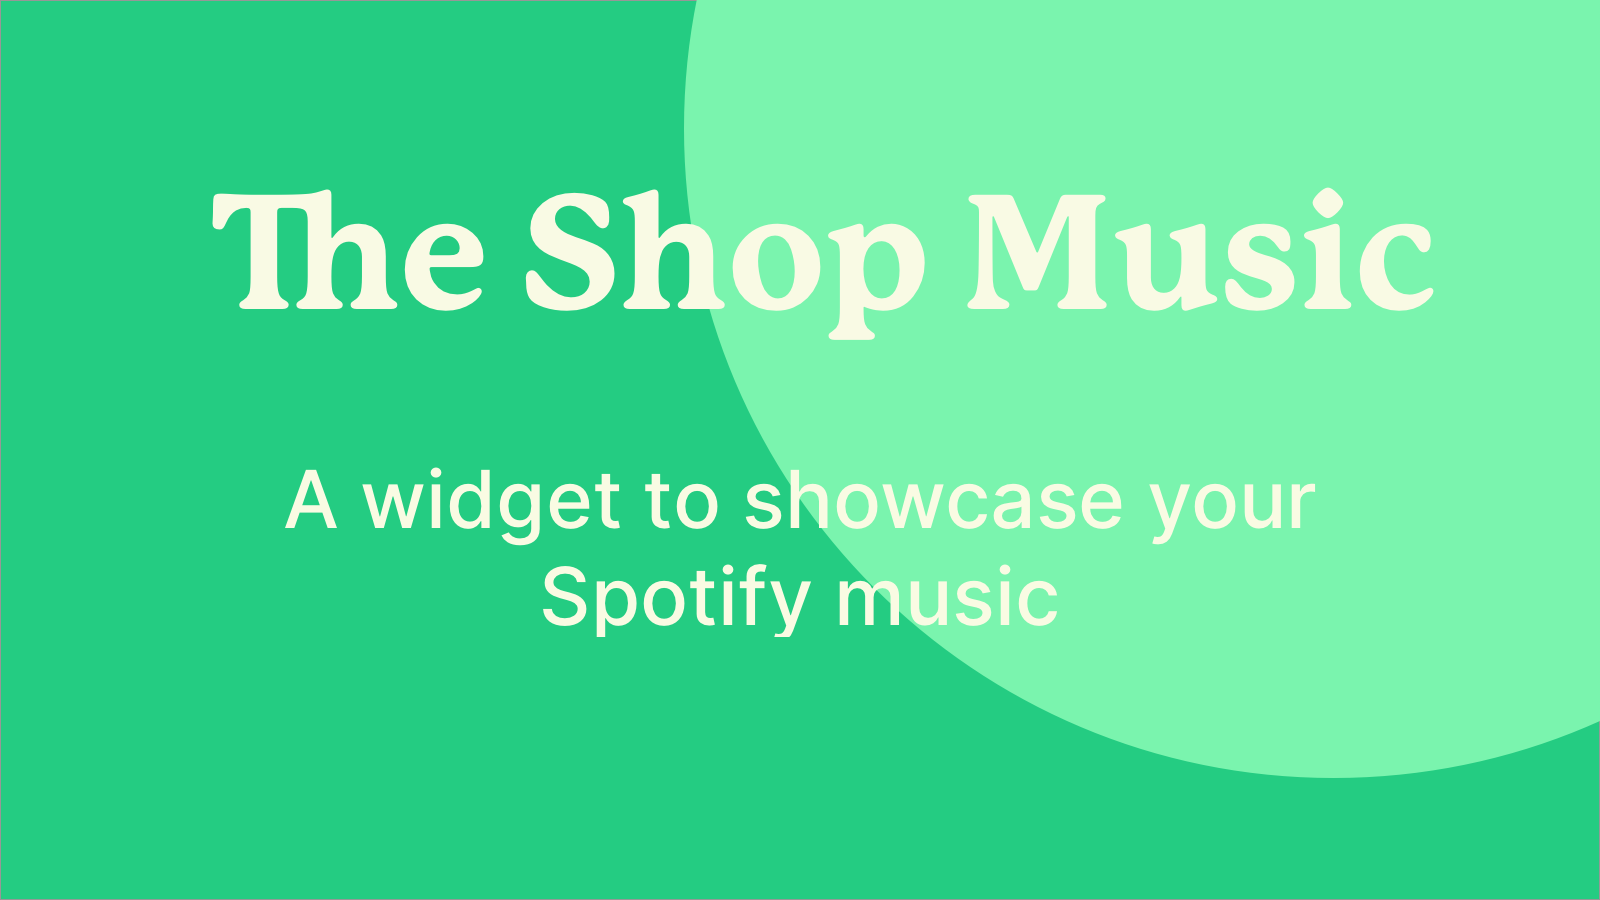 A widget to showcase your Spotify music